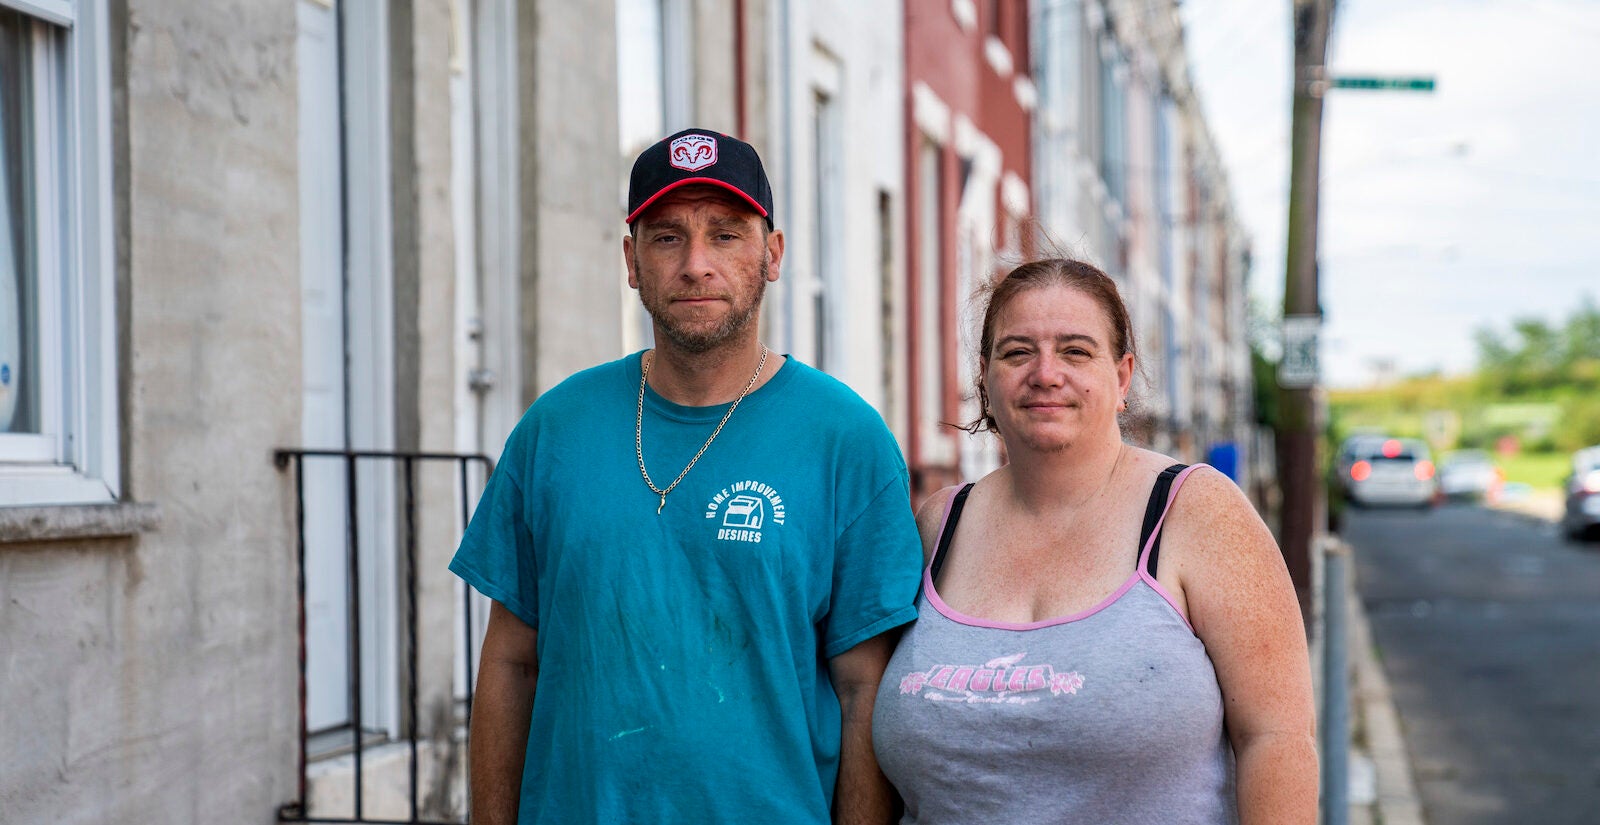 Pennsylvania's eviction moratorium expires Aug 31. Mike Fallaro and Lisa Swinehart have already begun packing and boxing their things, awaiting a threatened eviction that could come the first week their daughters are slated to start virtual school. (Jessica Kourkounis for Keystone Crossroads)